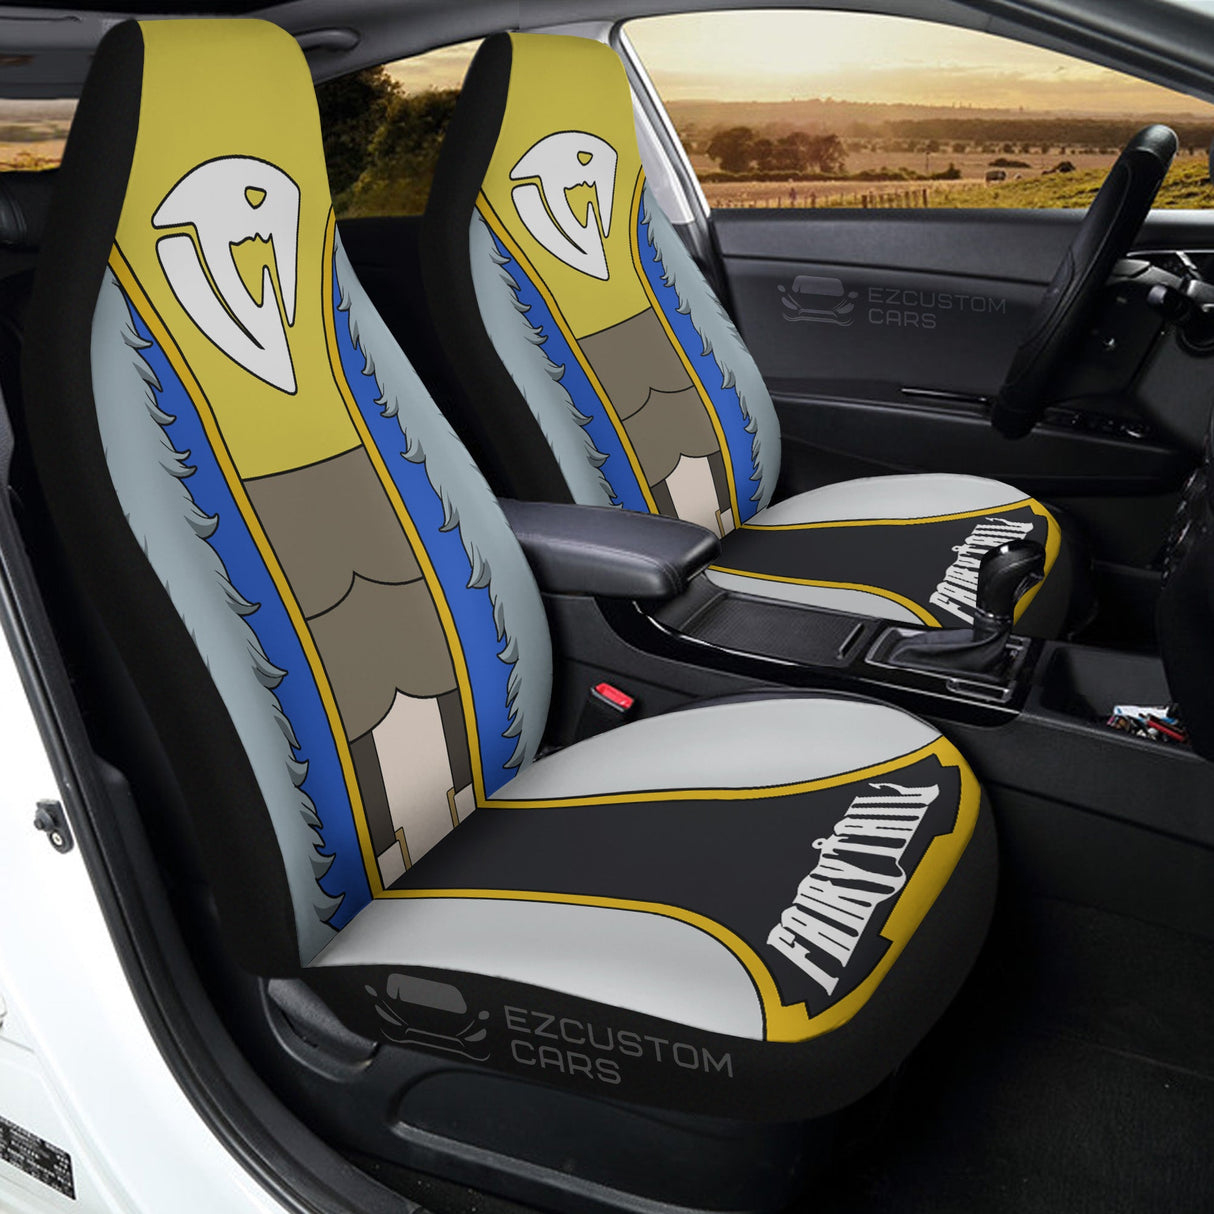 Anime Sexy Girl Mirajane Strauss Car Seat Covers Custom Fairy Tail Anime Gifts For Fans, everythinganimee